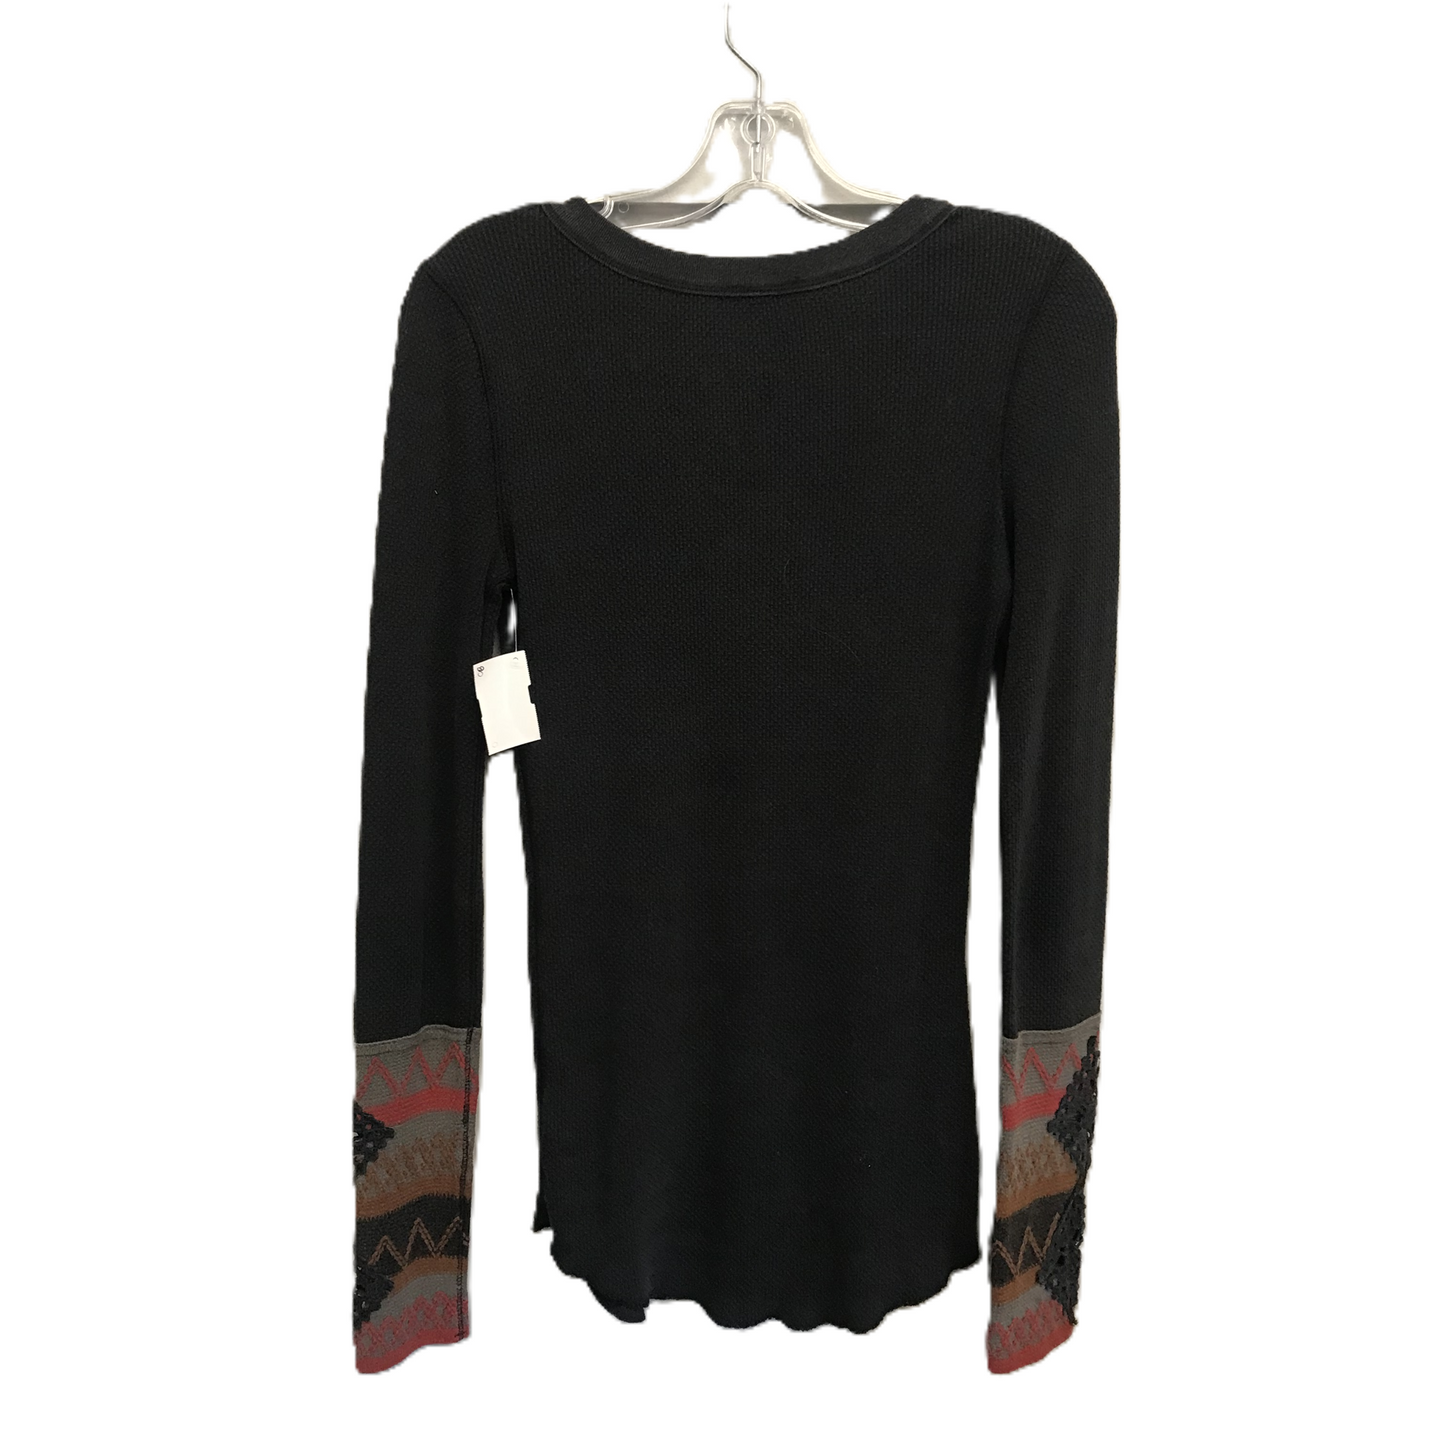 Black Top Long Sleeve By Free People, Size: M